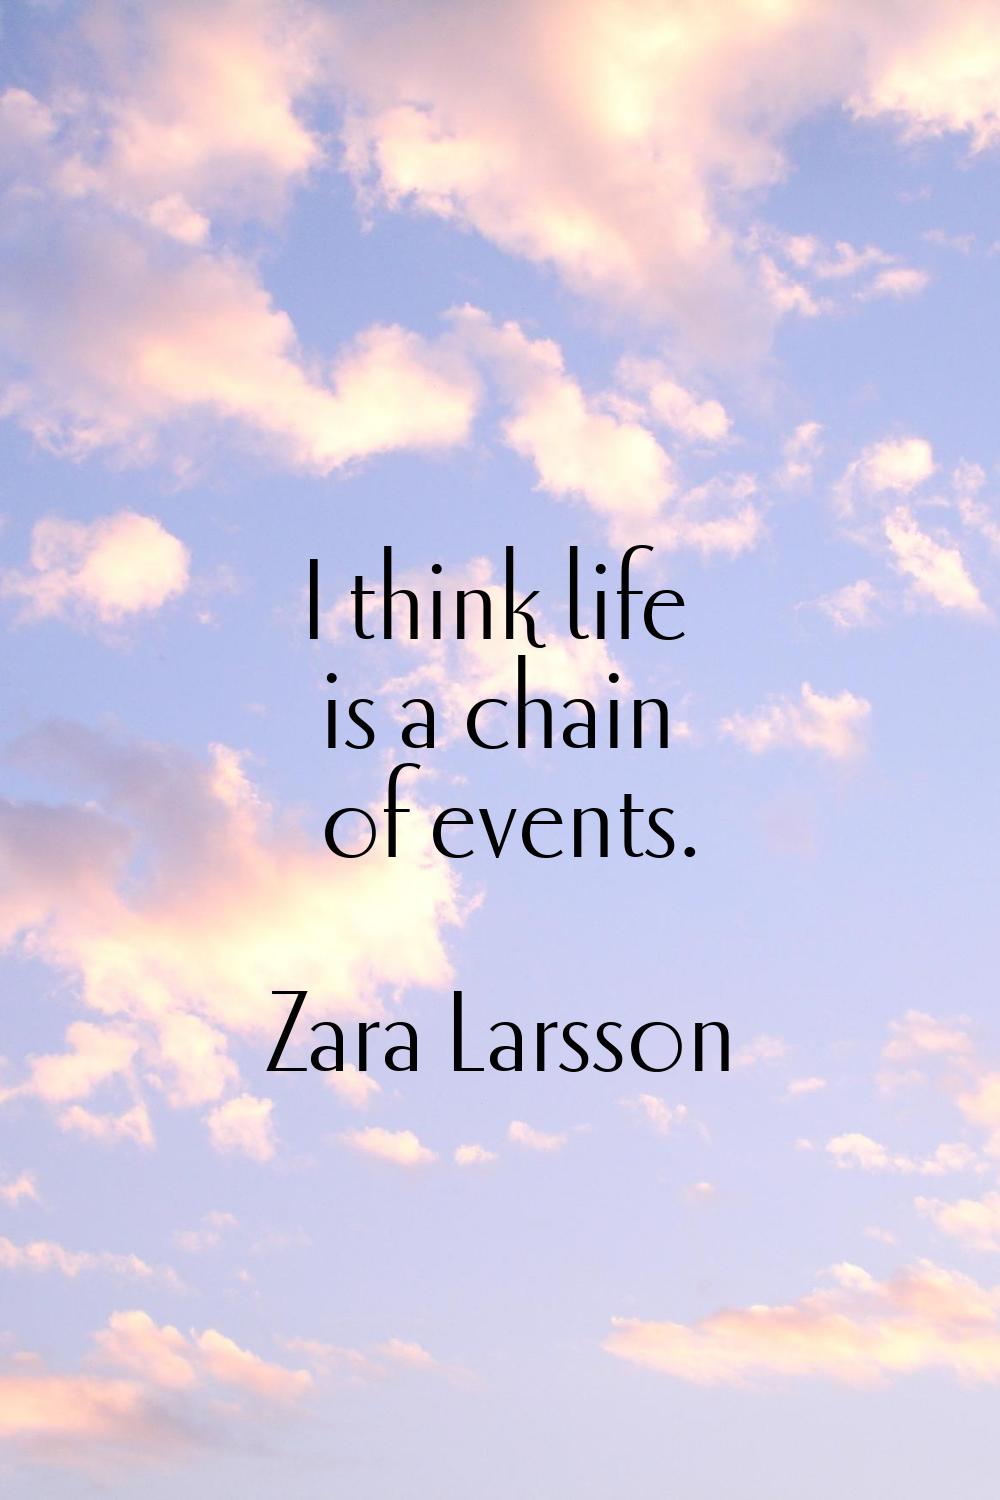 I think life is a chain of events.